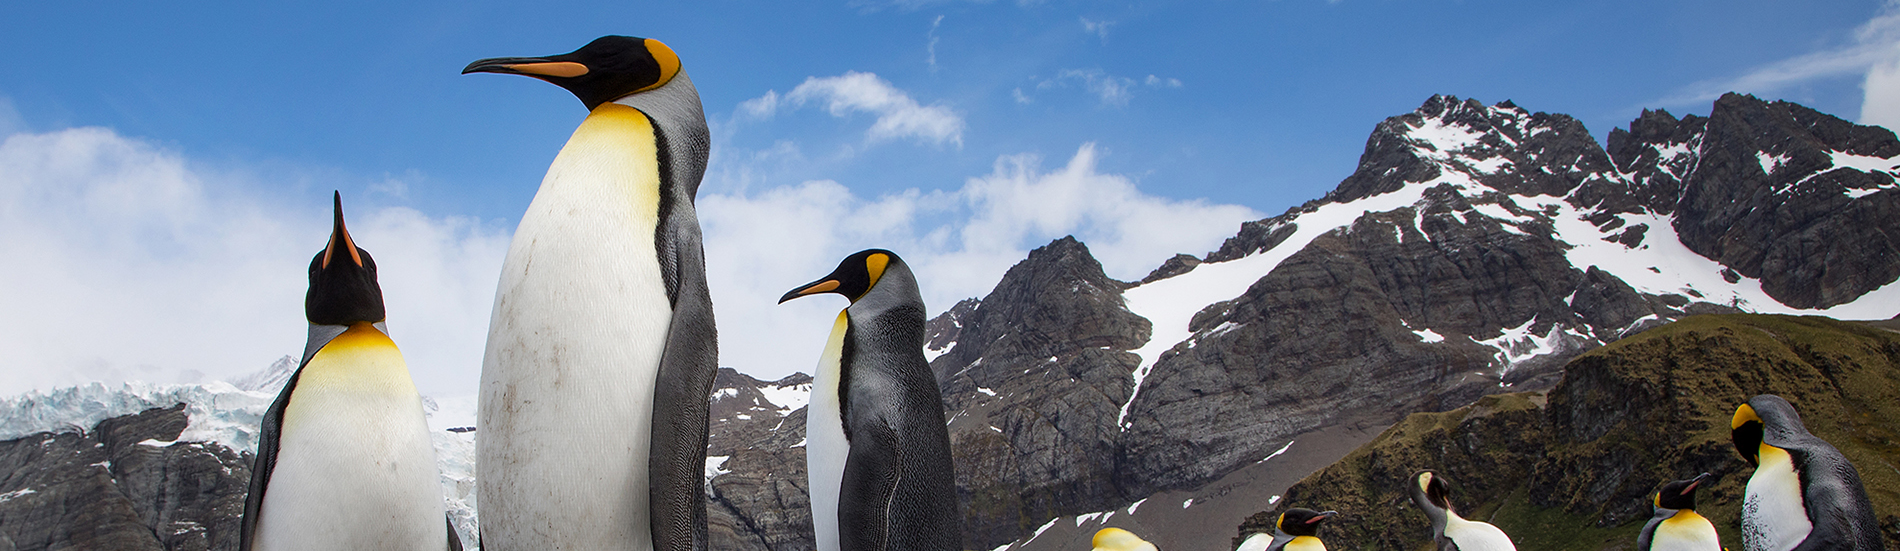 King penguin colony, with the Canon EOS 5D Mark IV and EF 24-105mm lens